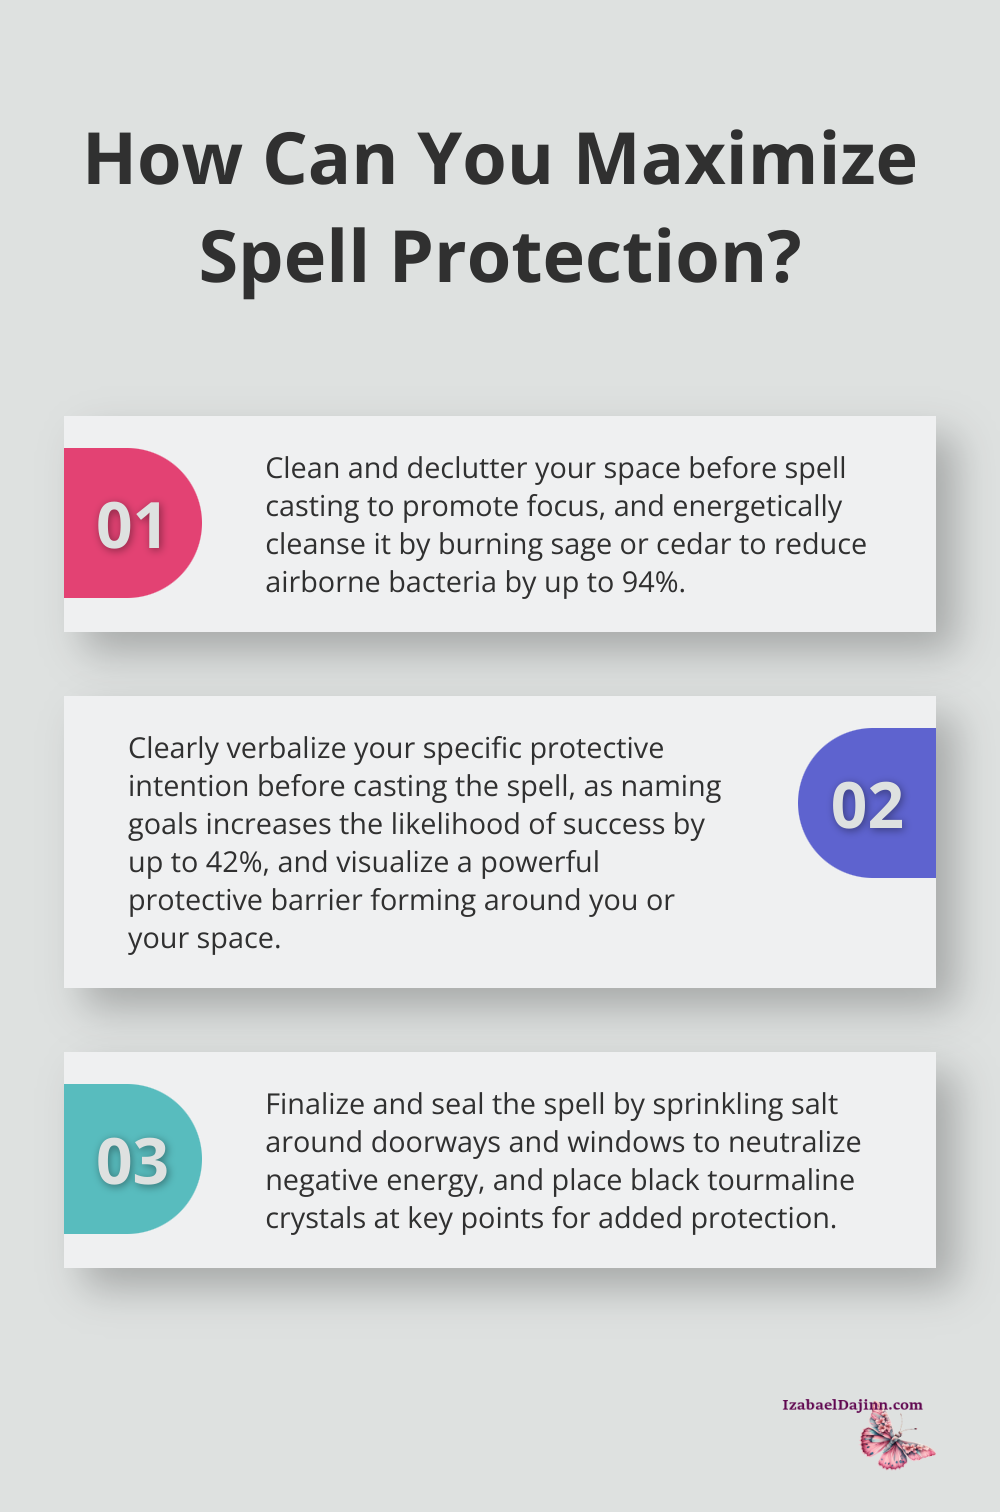 Fact - How Can You Maximize Spell Protection?